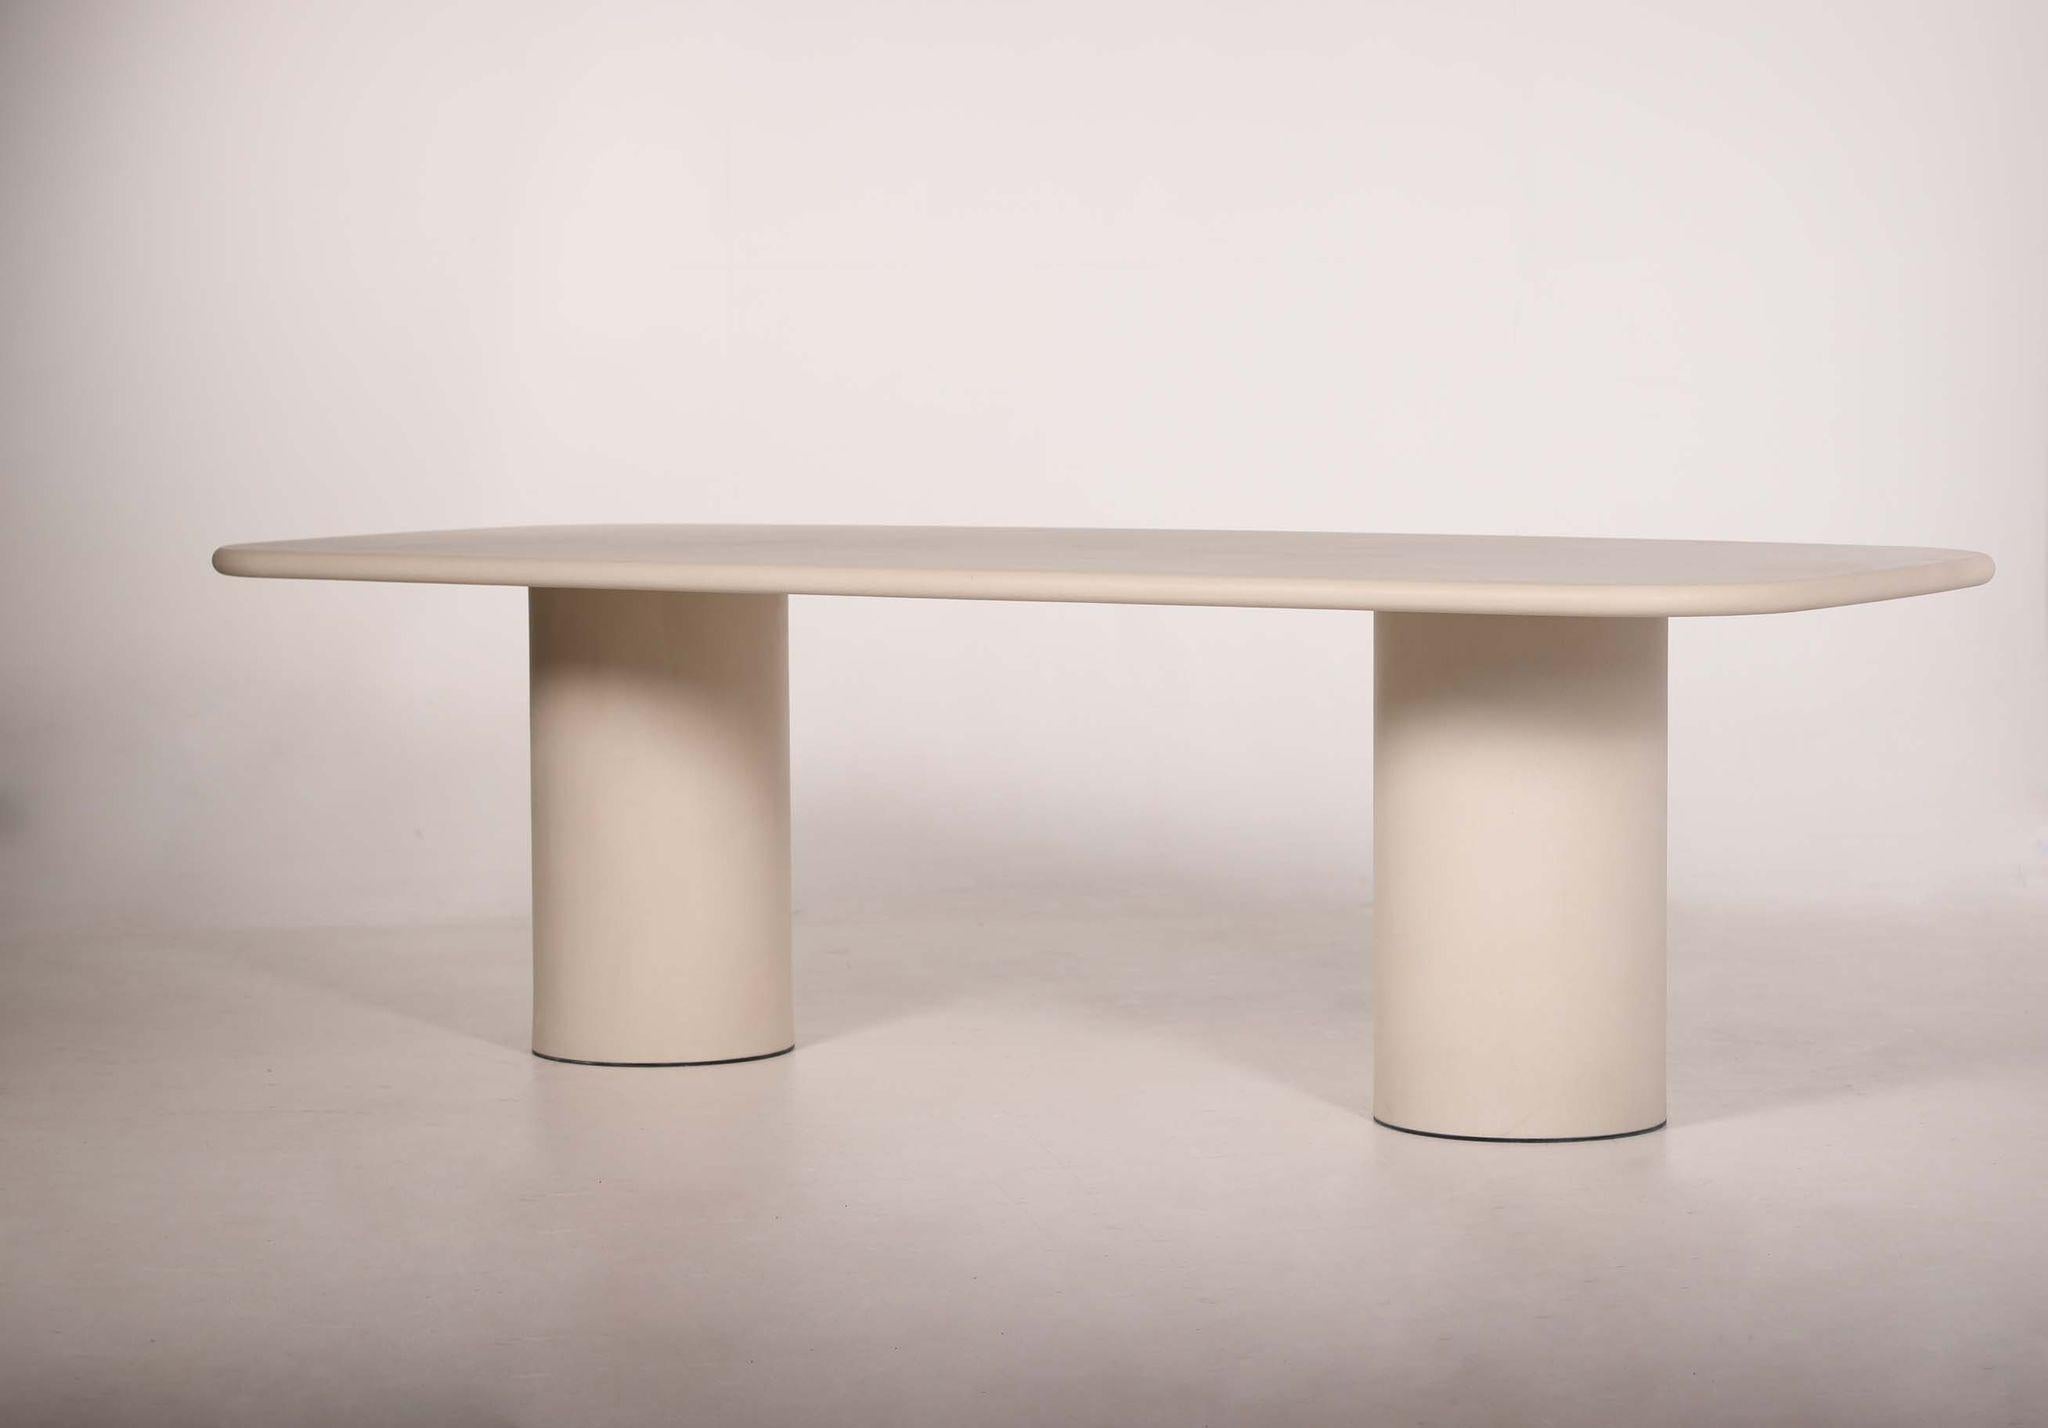 Organic Material Natural Plaster Hand-Sculpted Outdoor Dining Table 360 by Philippe Colette